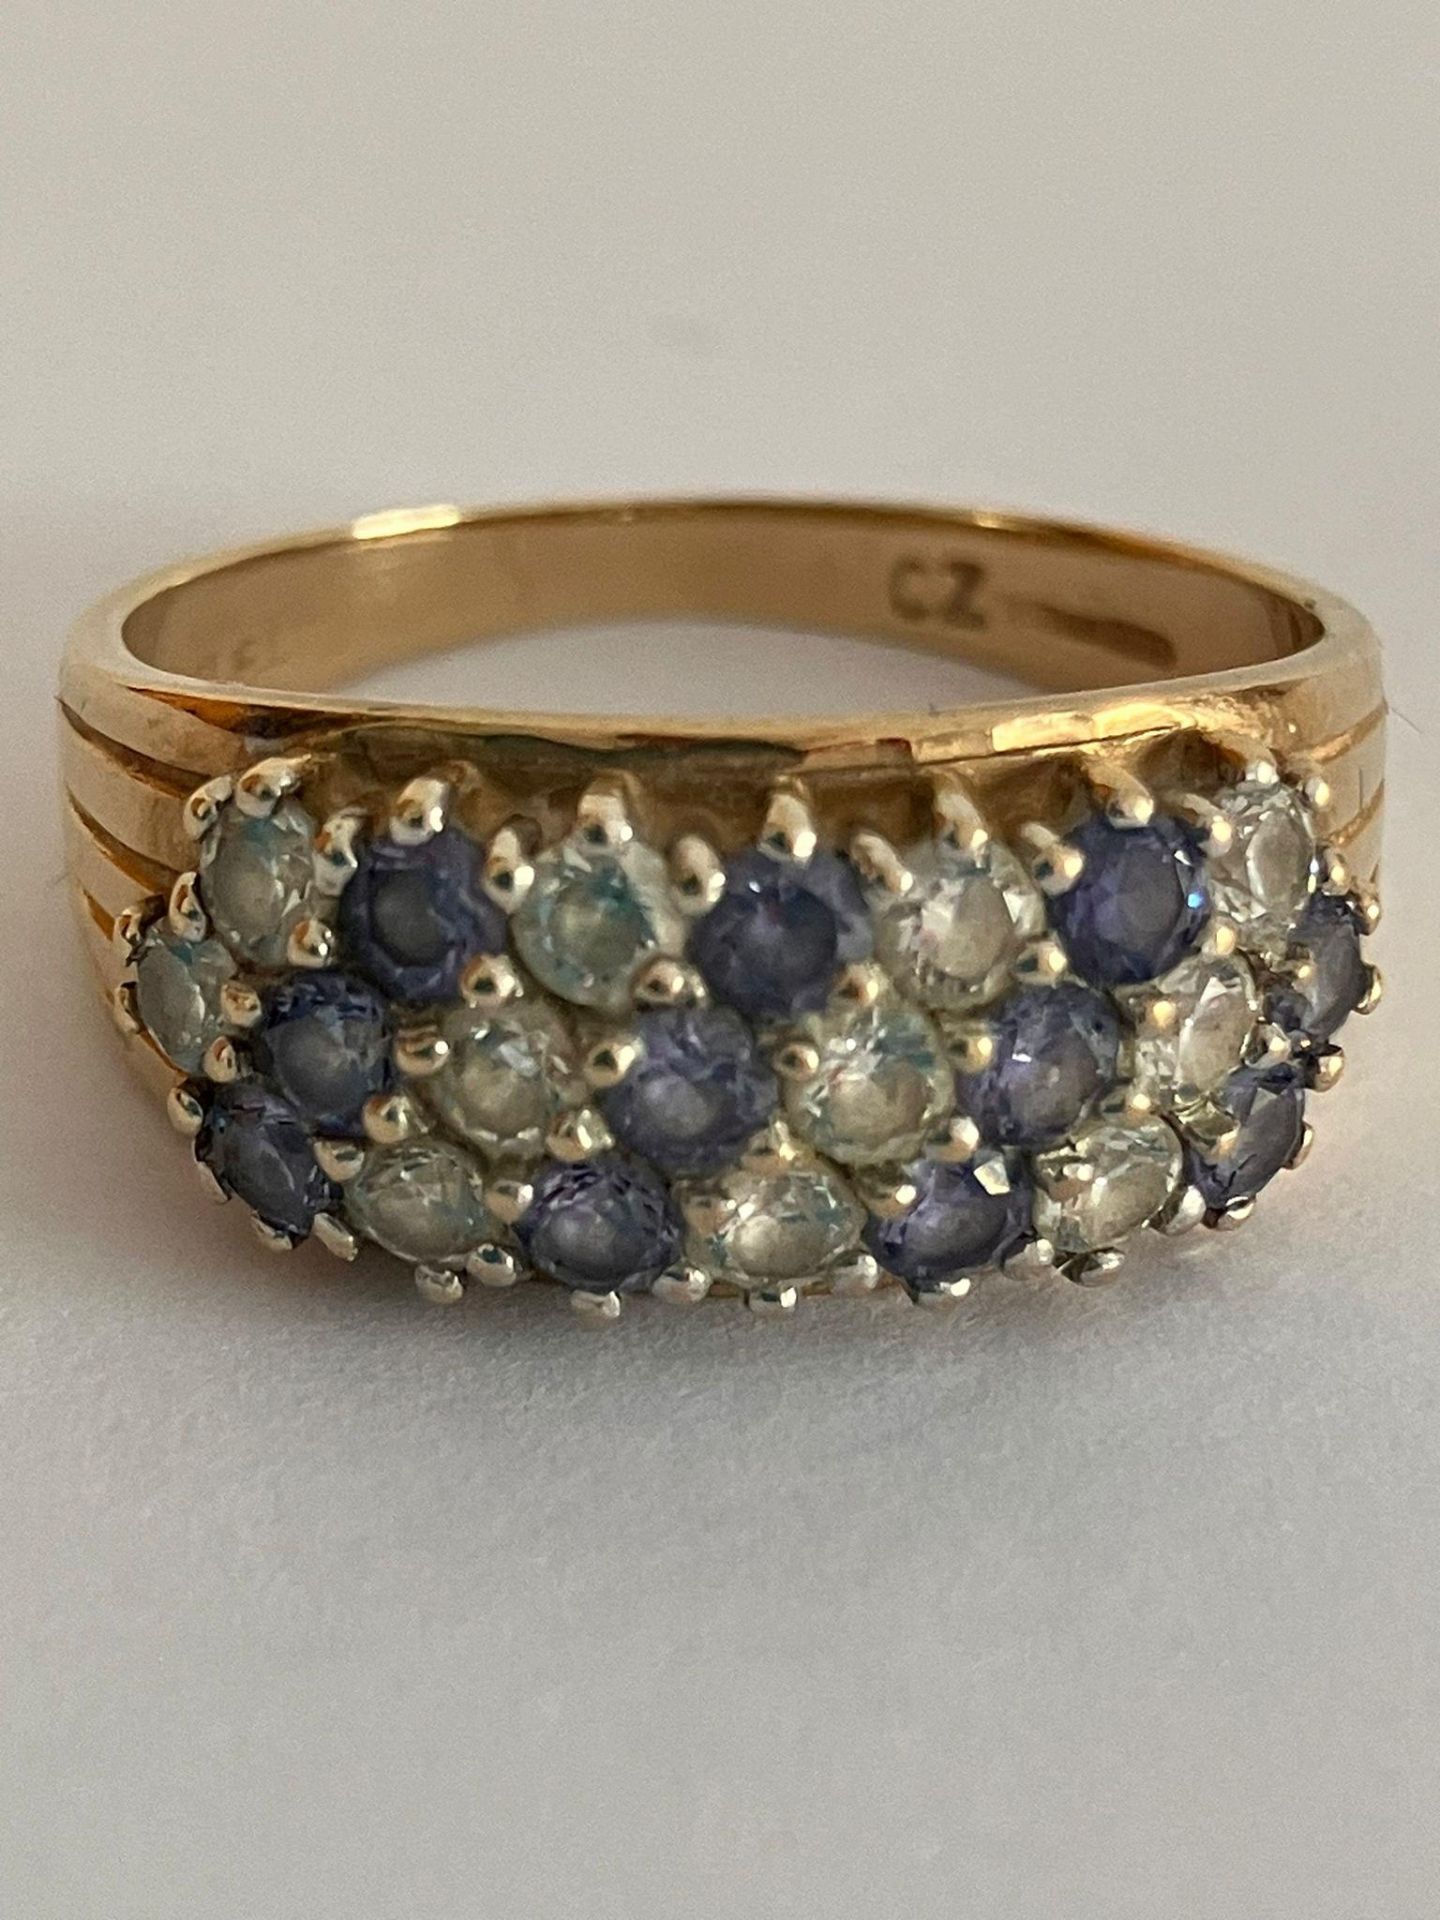 Magnificent 9 carat YELLOW GOLD RING set with BLUE and WHITE GEMSTONES. 3.75 grams. Size R.